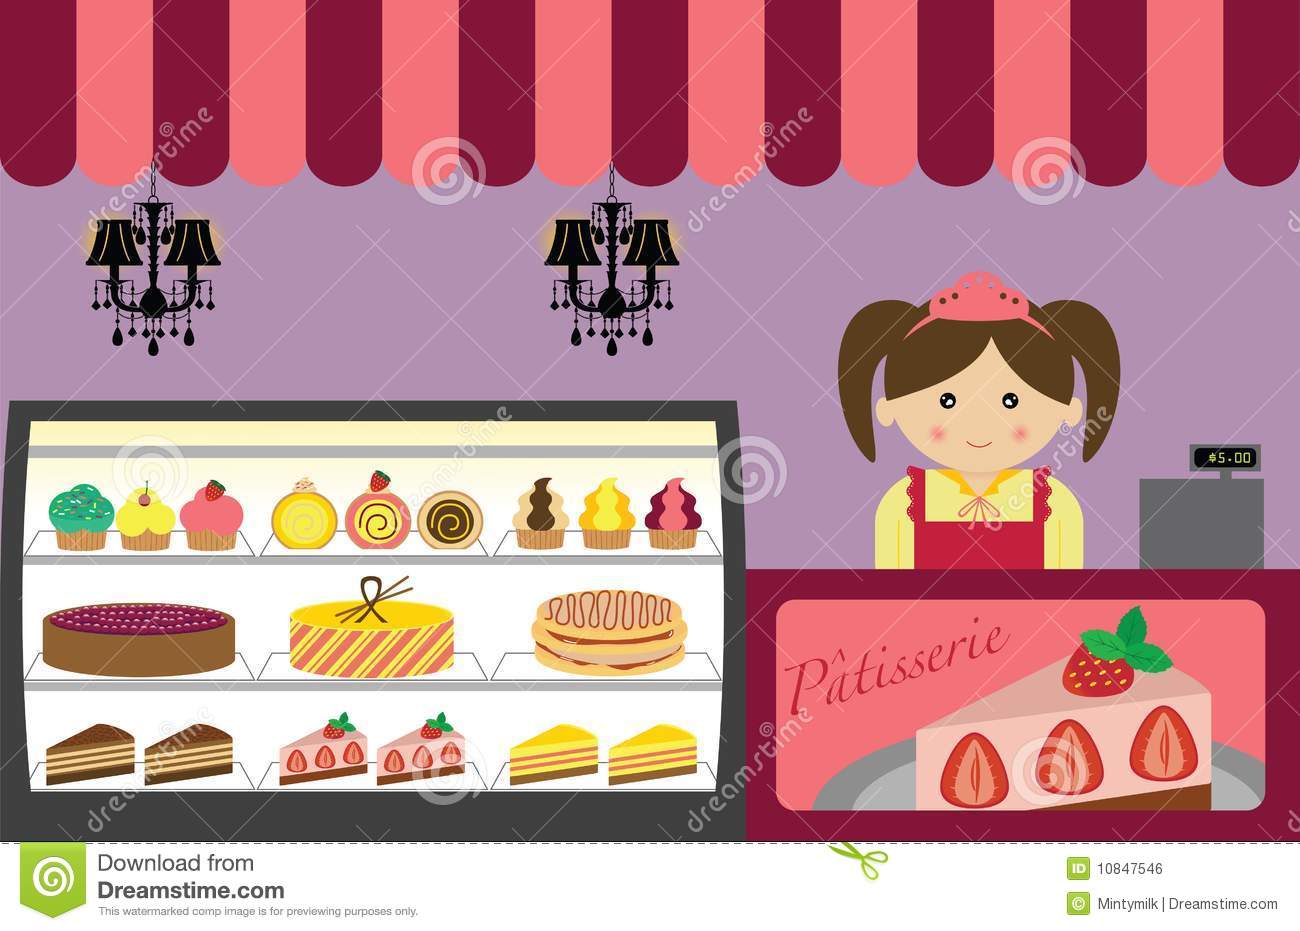 Pastry Shop Royalty Free Stock Image   Image  10847546